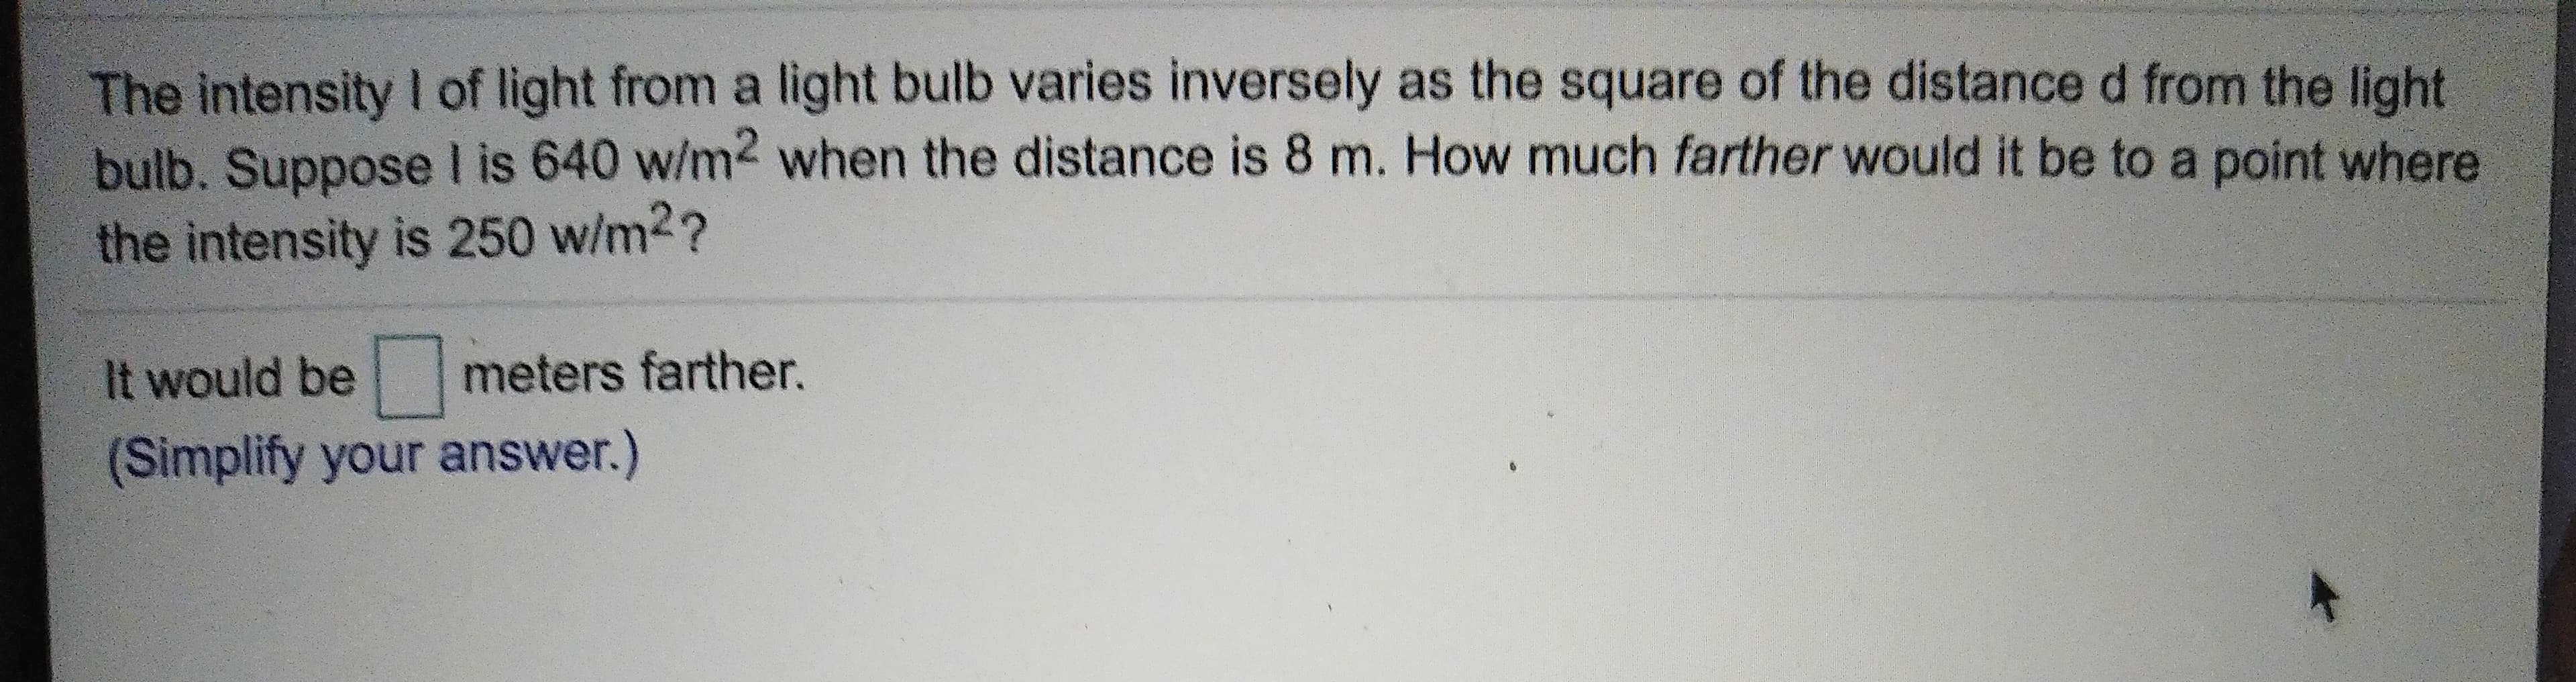 The intensity I of light from a light bulb varies inversely as the square of the distance d from the light
bulb. Suppose l is 640 w/m2 when the distance is 8 m. How much farther would it be to a point where
the intensity is 250 w/m2?
It would be meters farther.
(Simplify your answer.)
